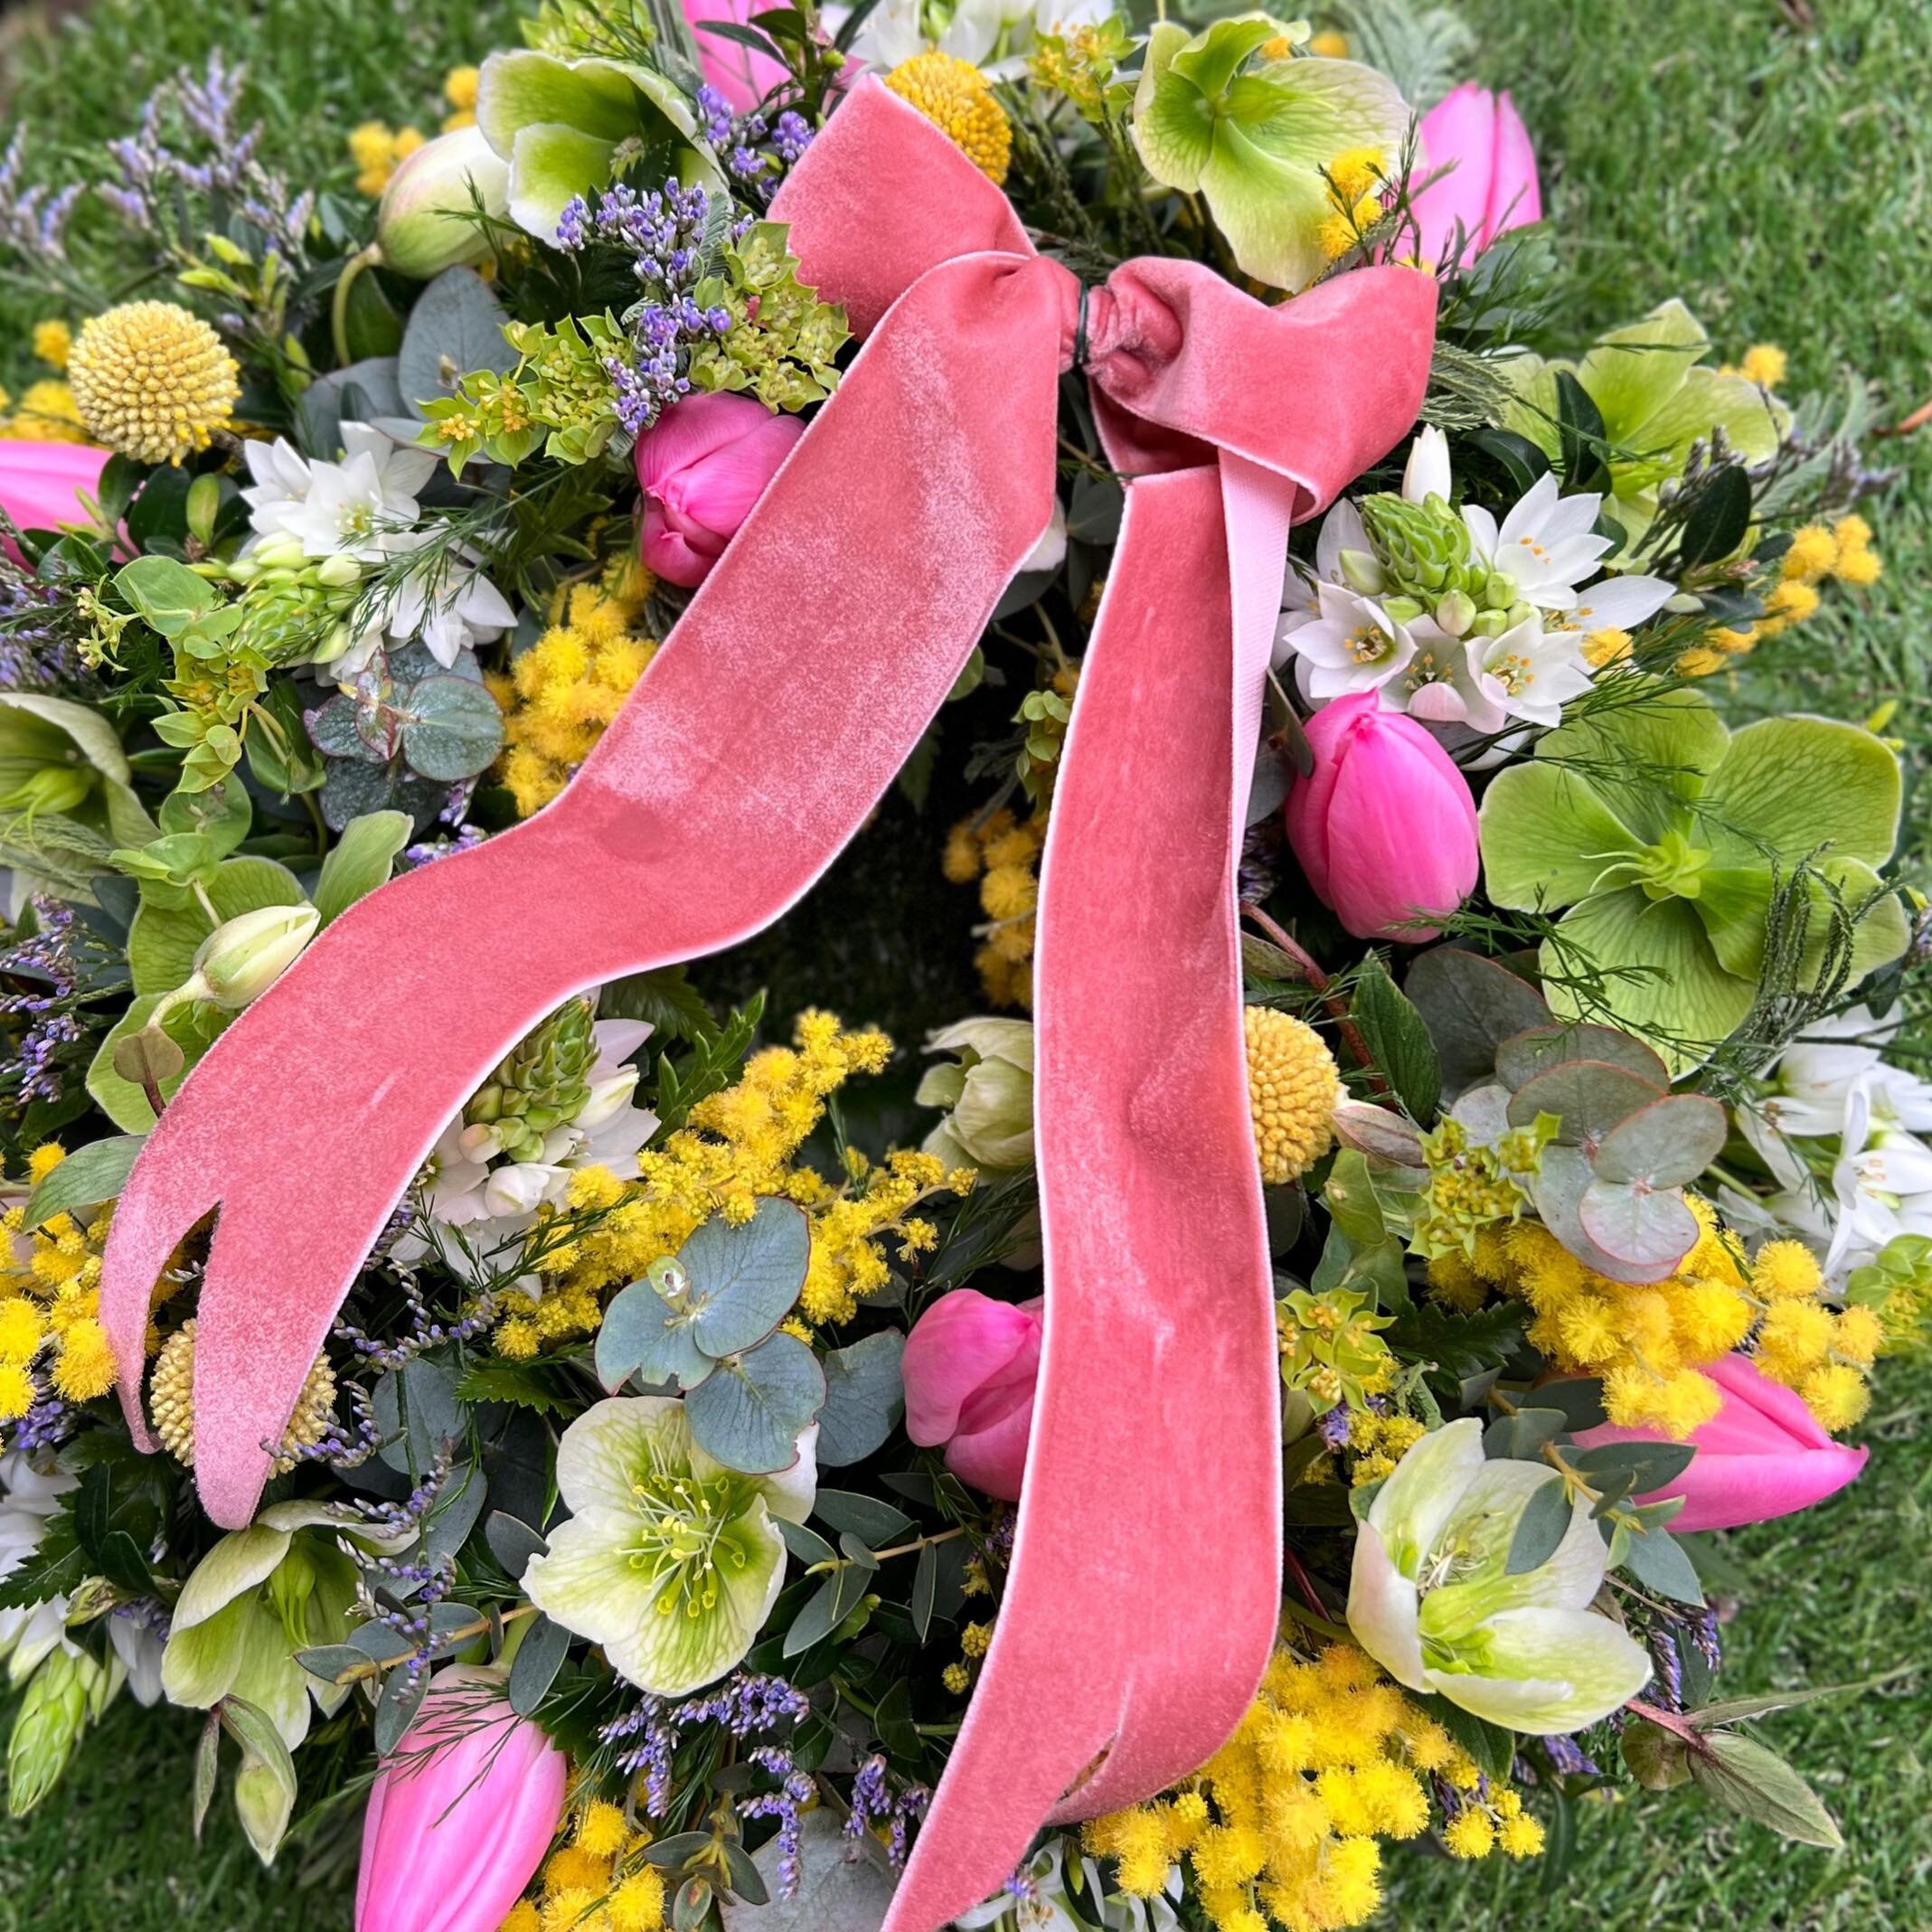 In love with this spring wreath made for our customer ✨
The perfect addition to your door this Easter 🐣
#springwreath #spring #hellabore #mimosa #florist #flowers #tulips #bow